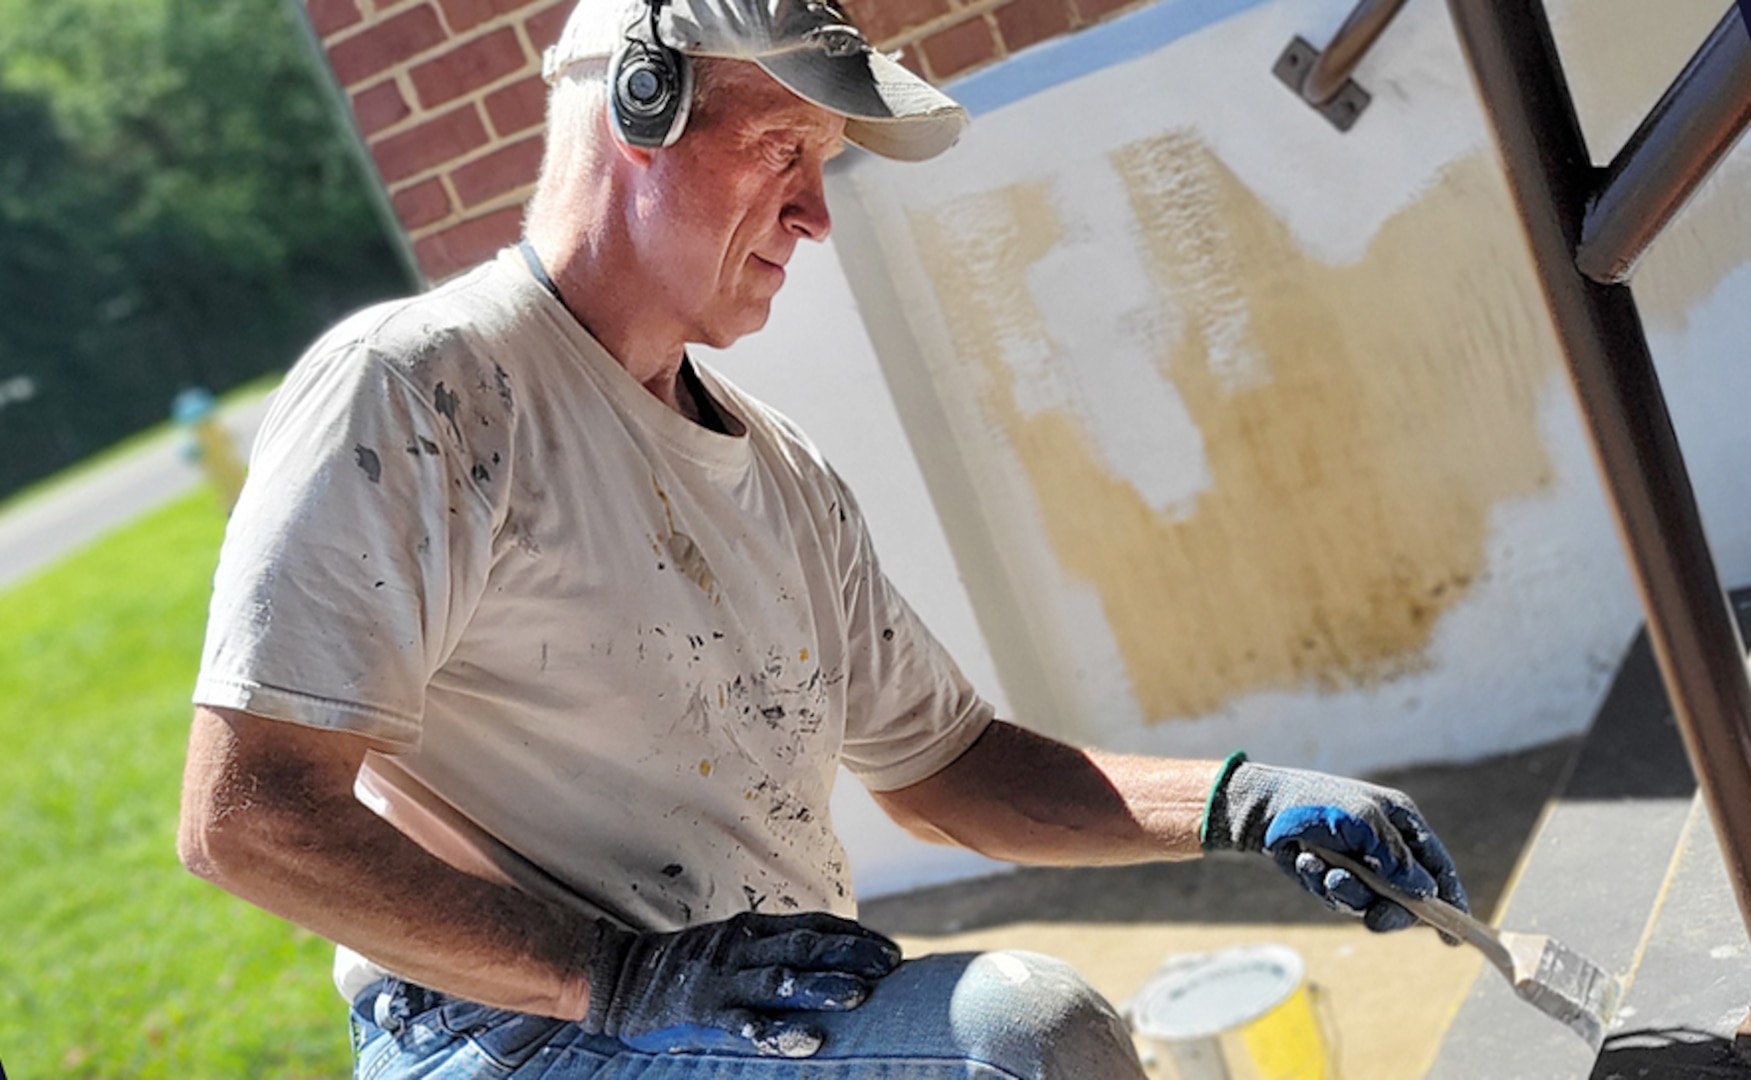 Preserving history, one brush stroke at a time